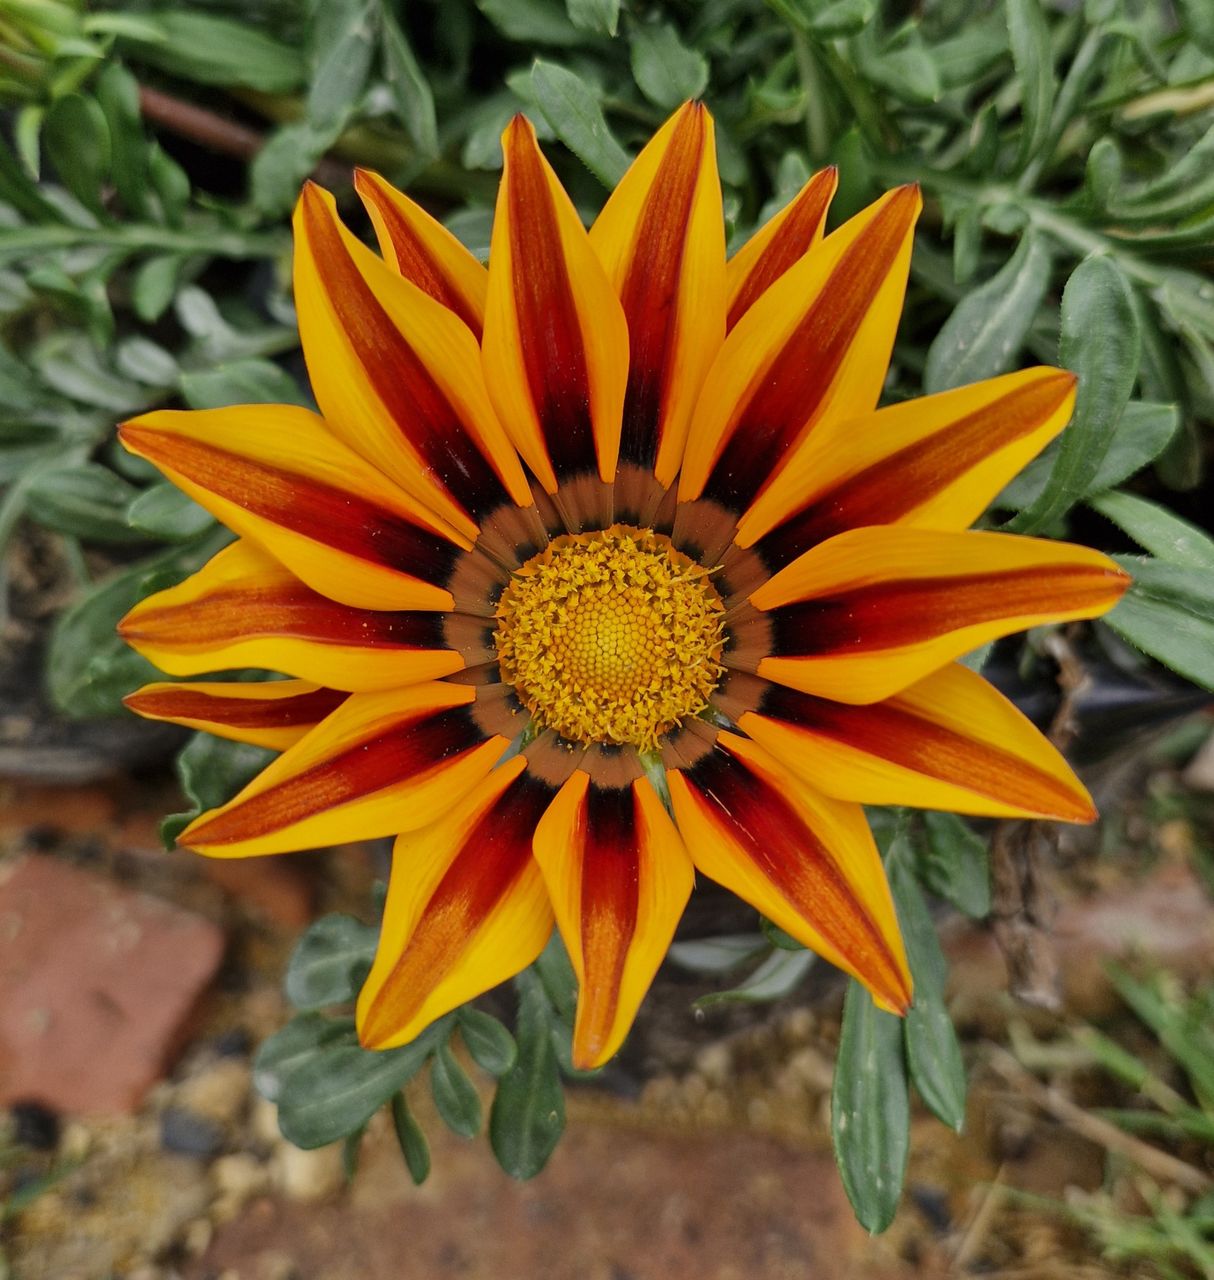 flowering plant, flower, plant, freshness, flower head, beauty in nature, growth, petal, yellow, inflorescence, fragility, close-up, nature, macro photography, pollen, no people, day, wildflower, gazania, high angle view, focus on foreground, outdoors, directly above, herb, botany, orange color